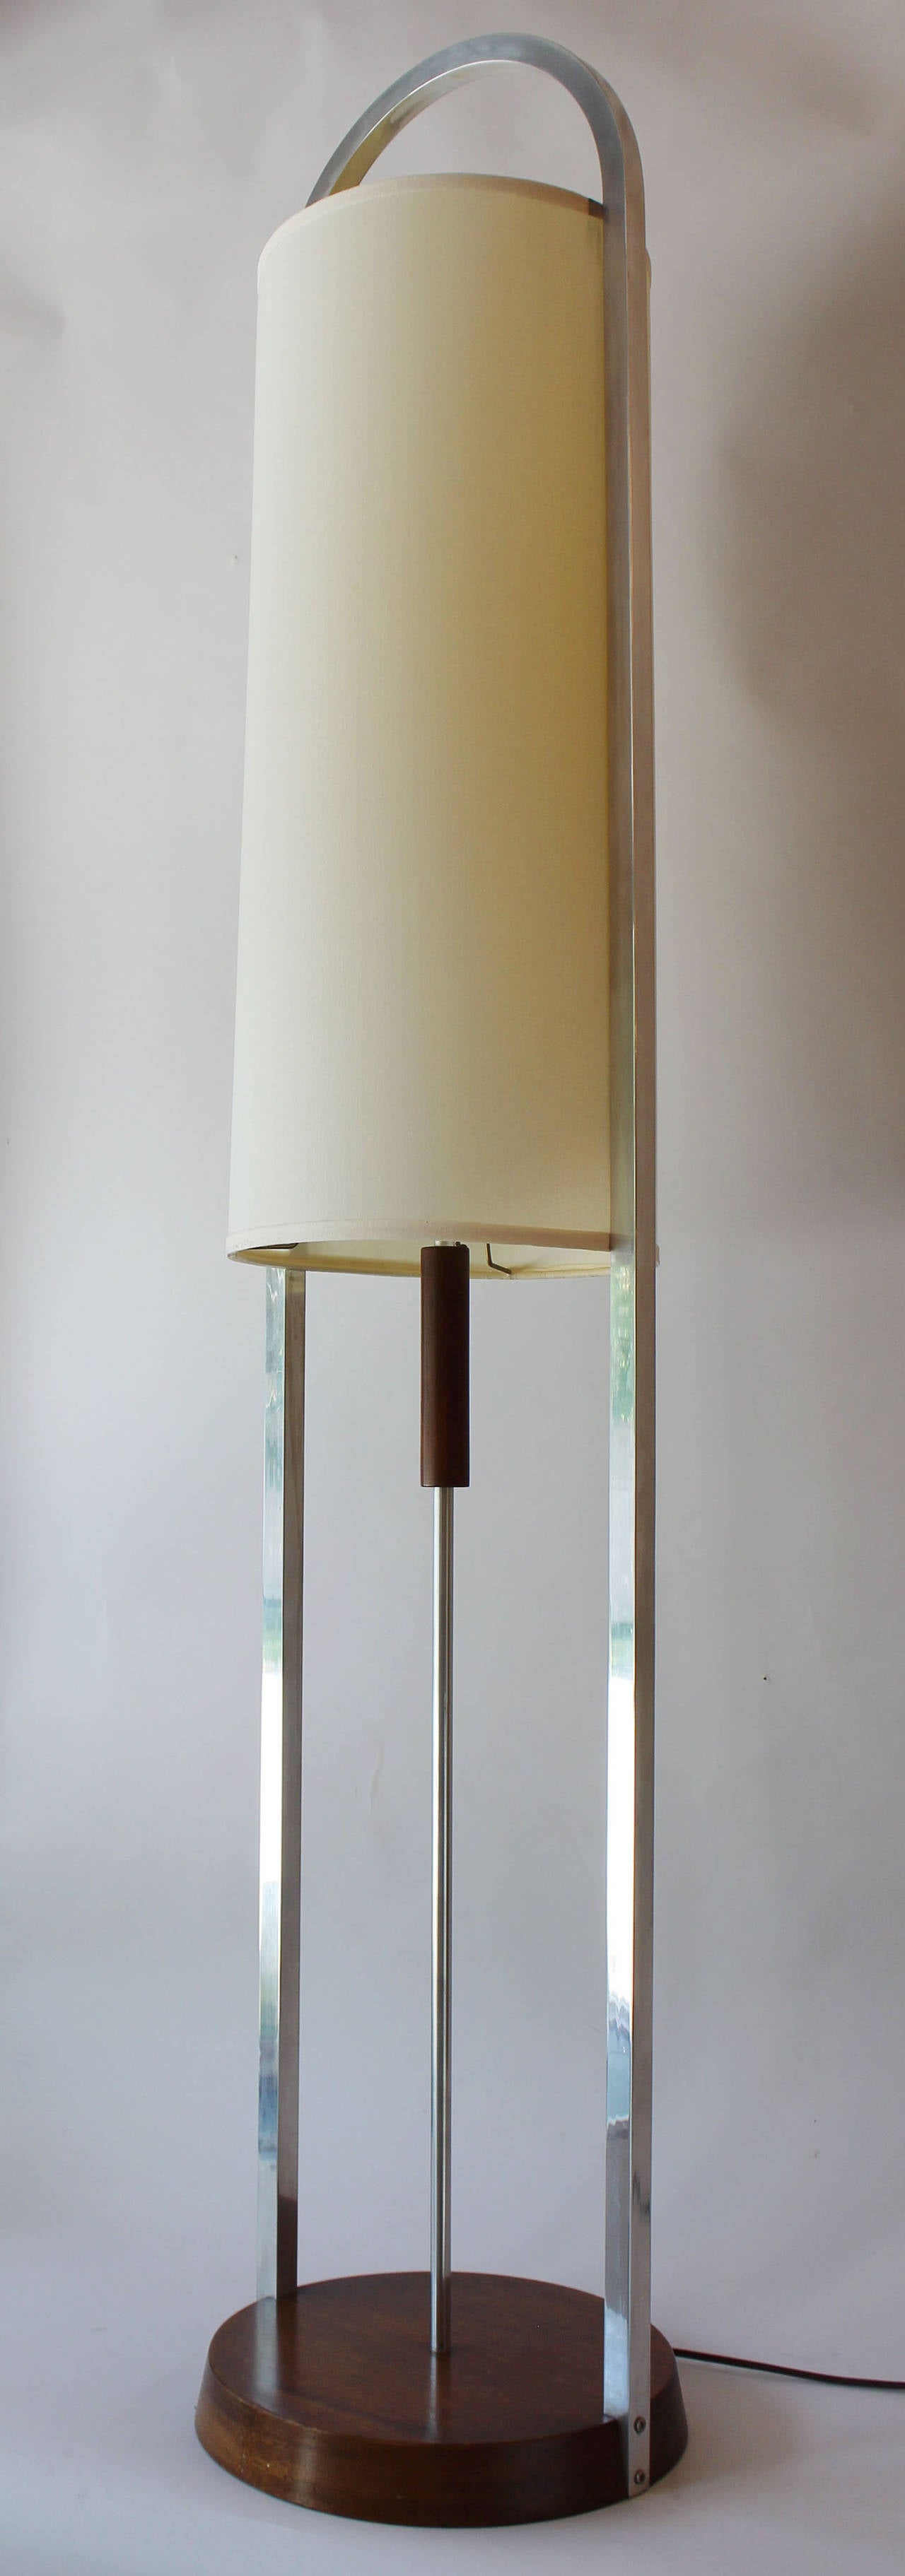 A walnut and aluminum floor lamp with cloth shade by Modeline.